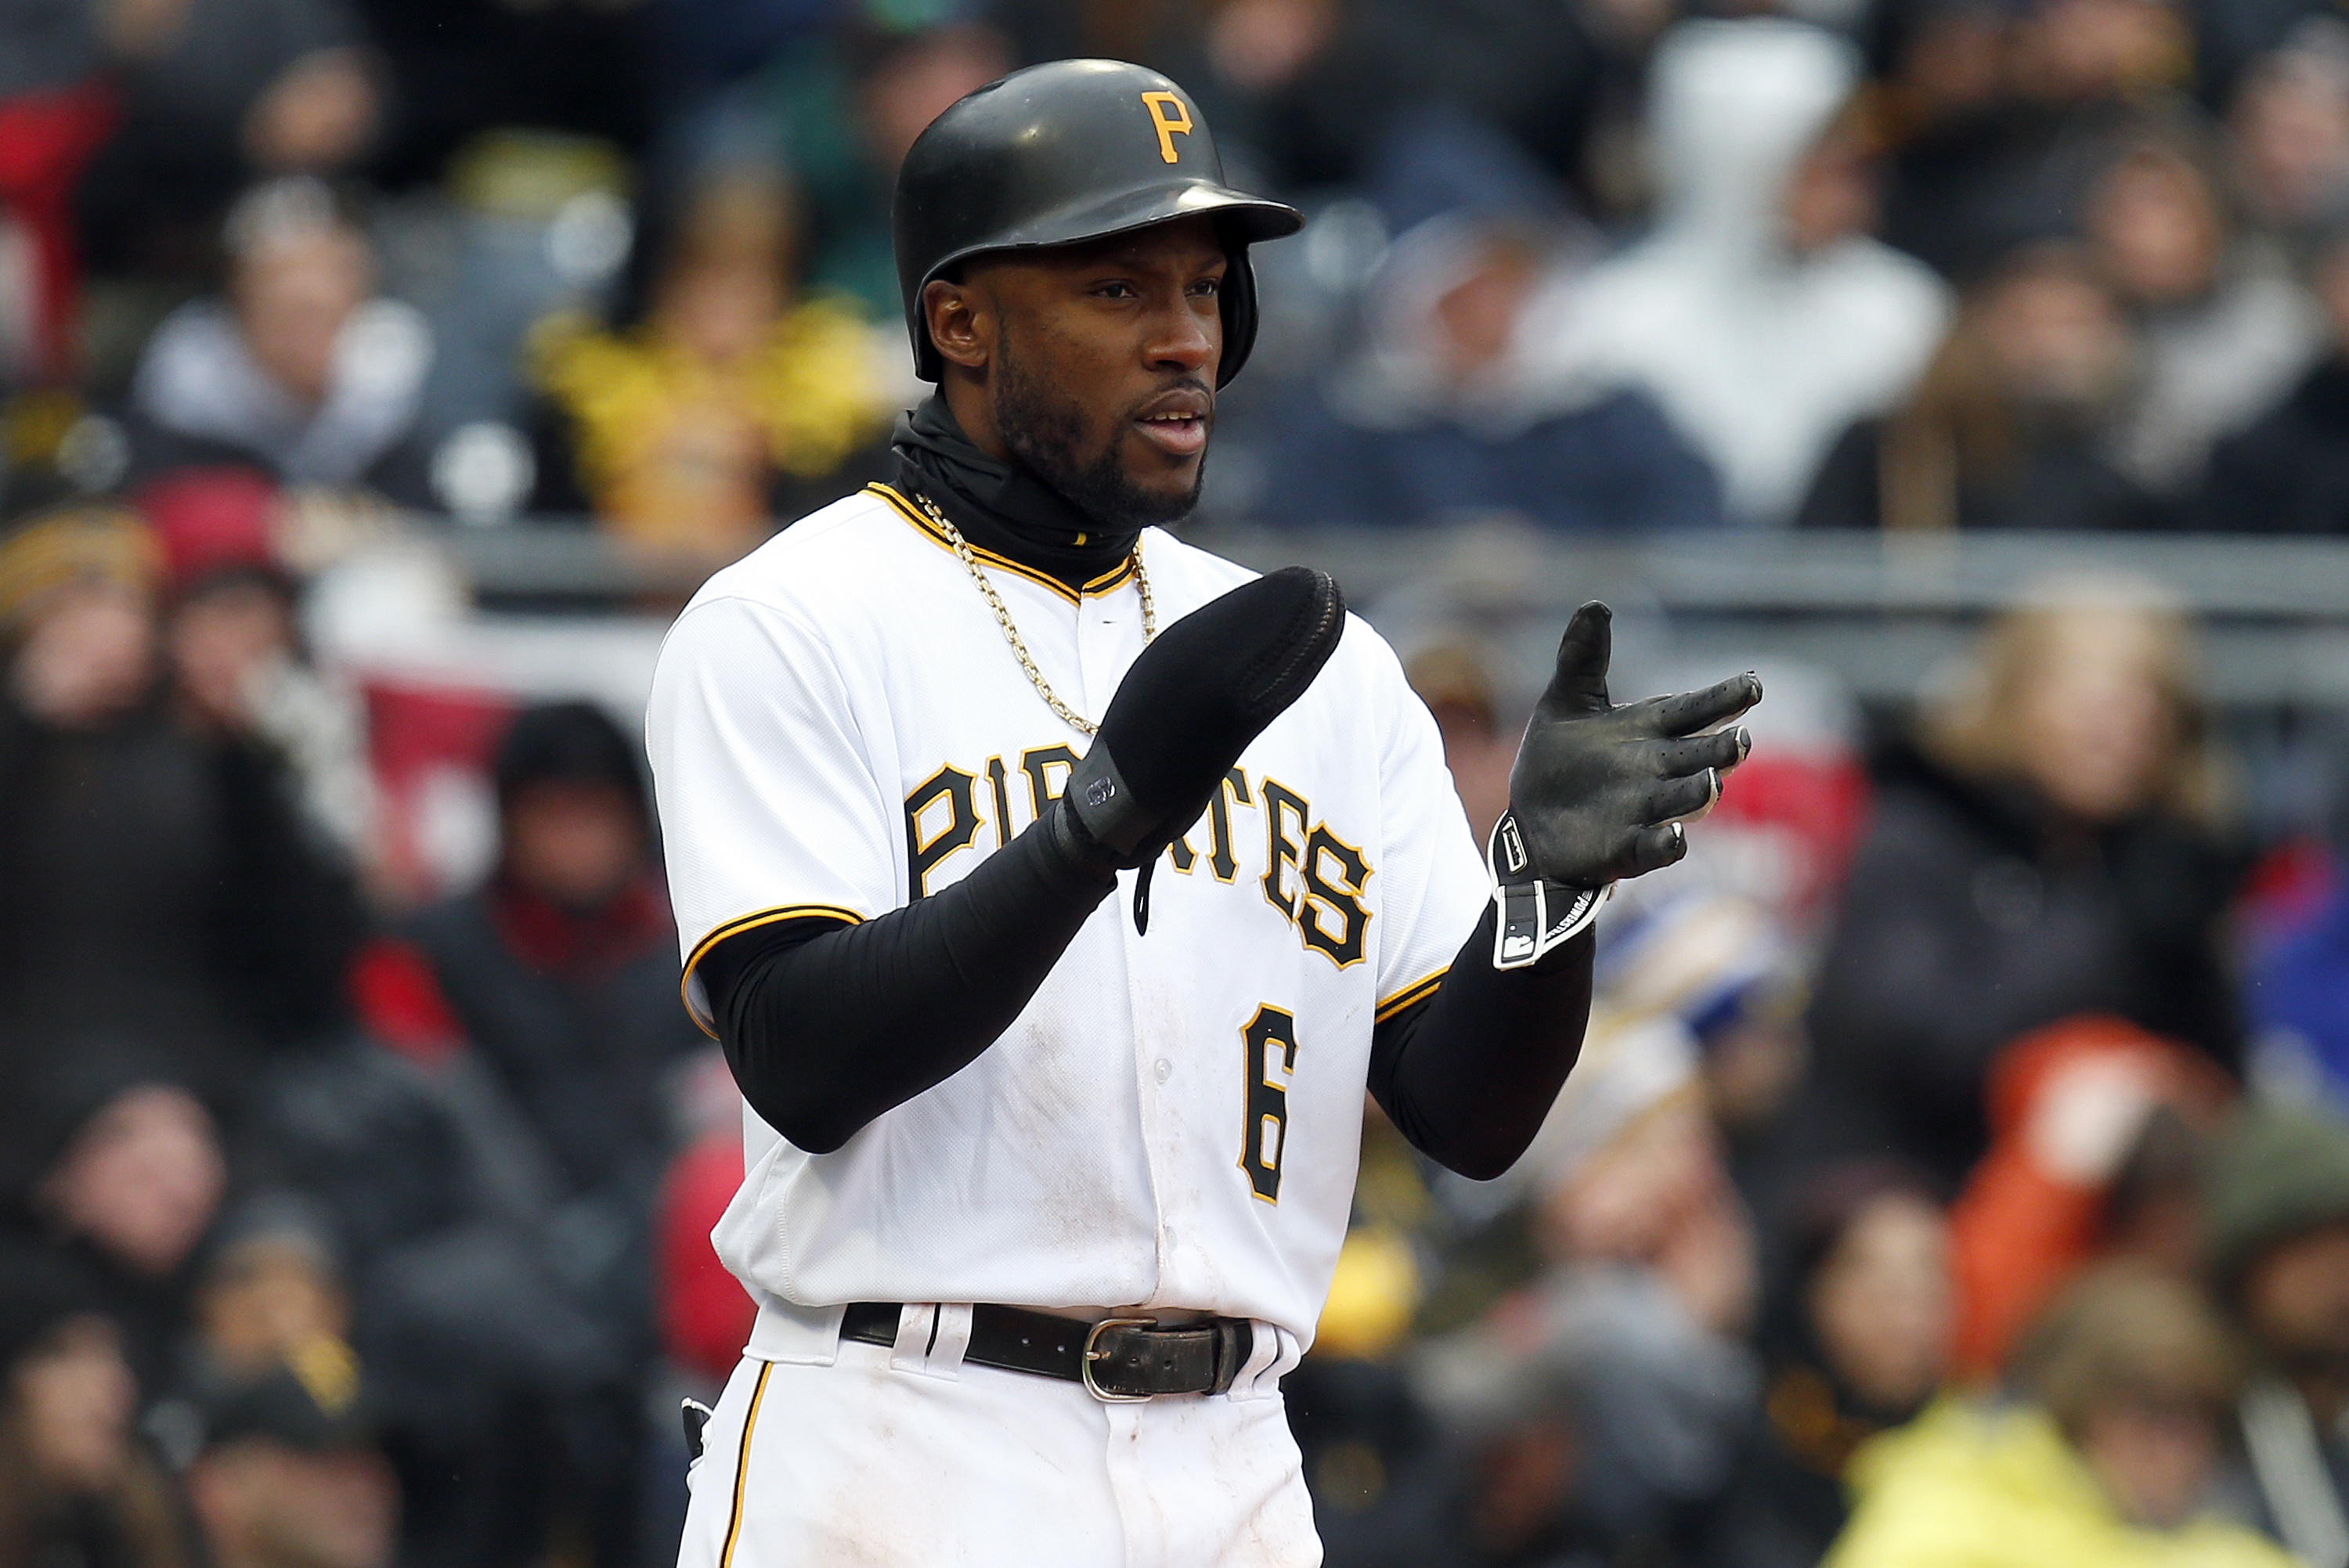 Starling Marte Returns to Pirates Lineup After 80-Game PEDs